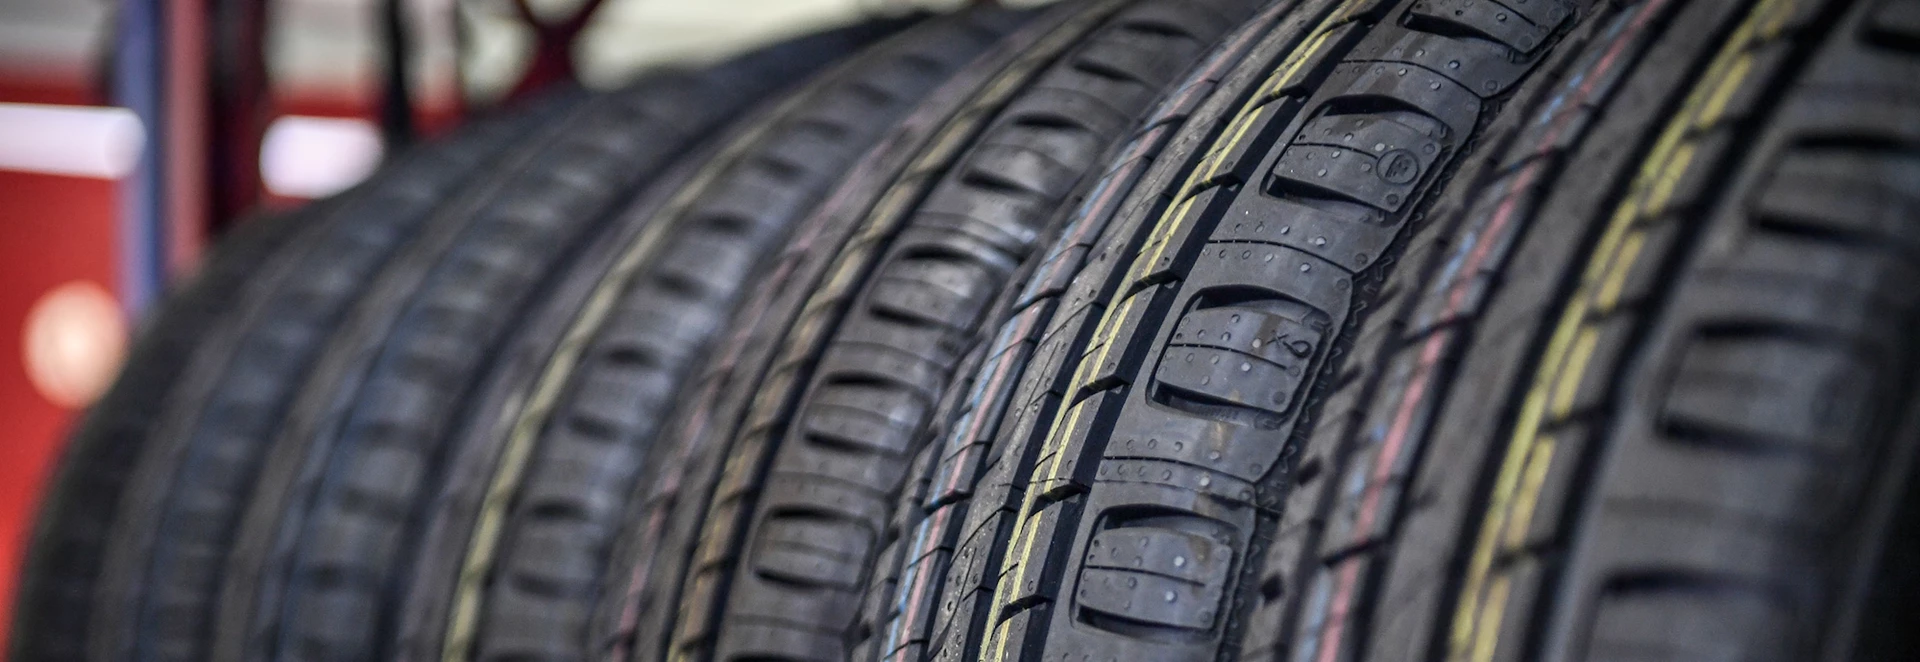 Drivers can be fined £10,000 if their tyres look like this